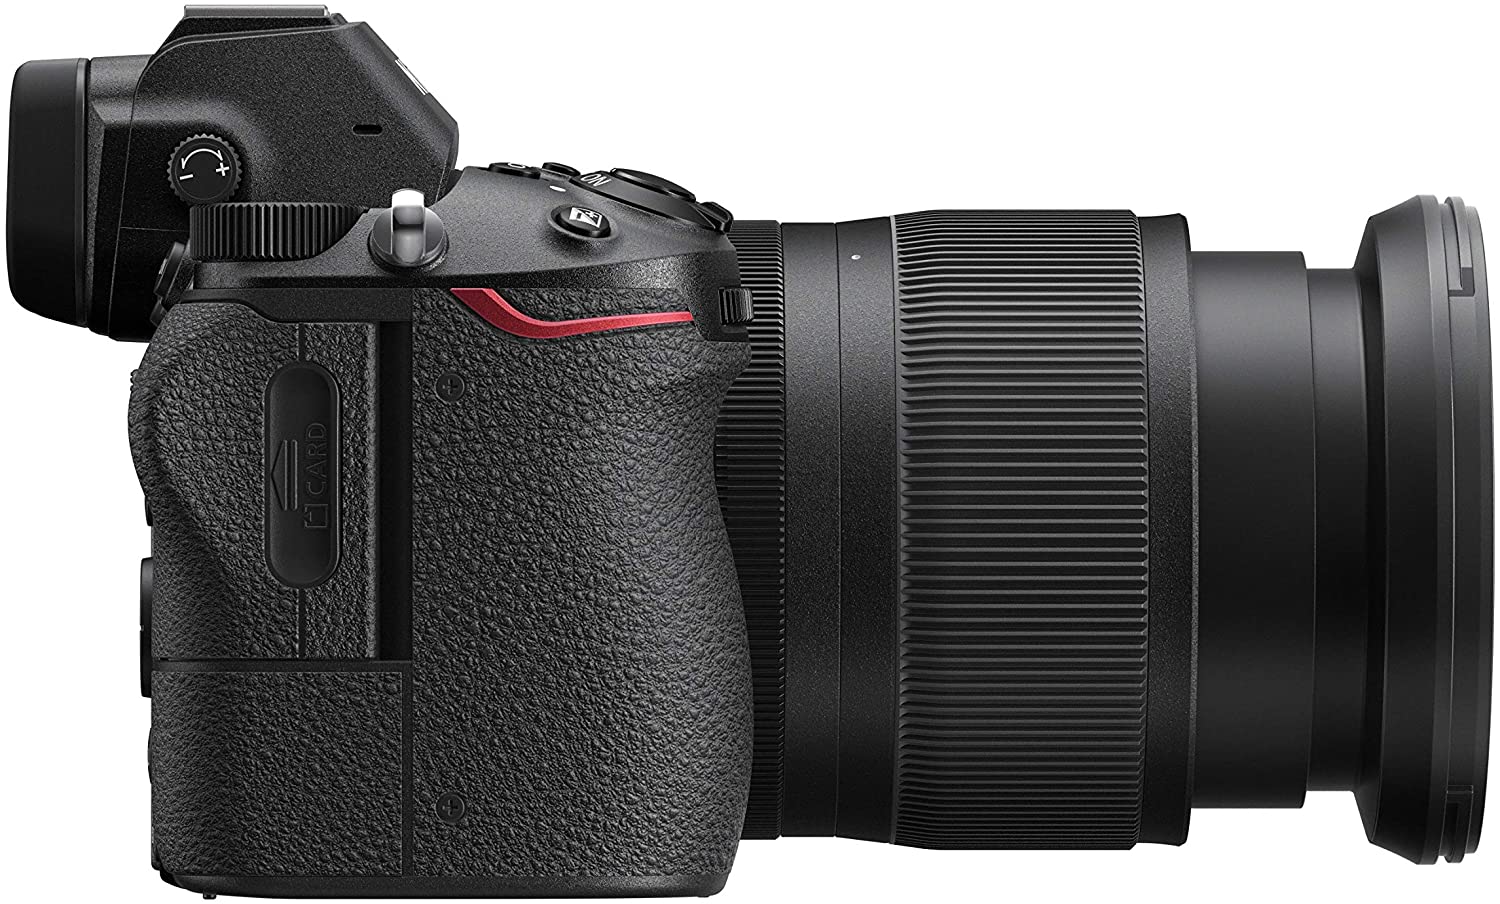 Nikon Z7 With 24-70mm f/4 S Lens and FTZ Mount Adapter | Camix